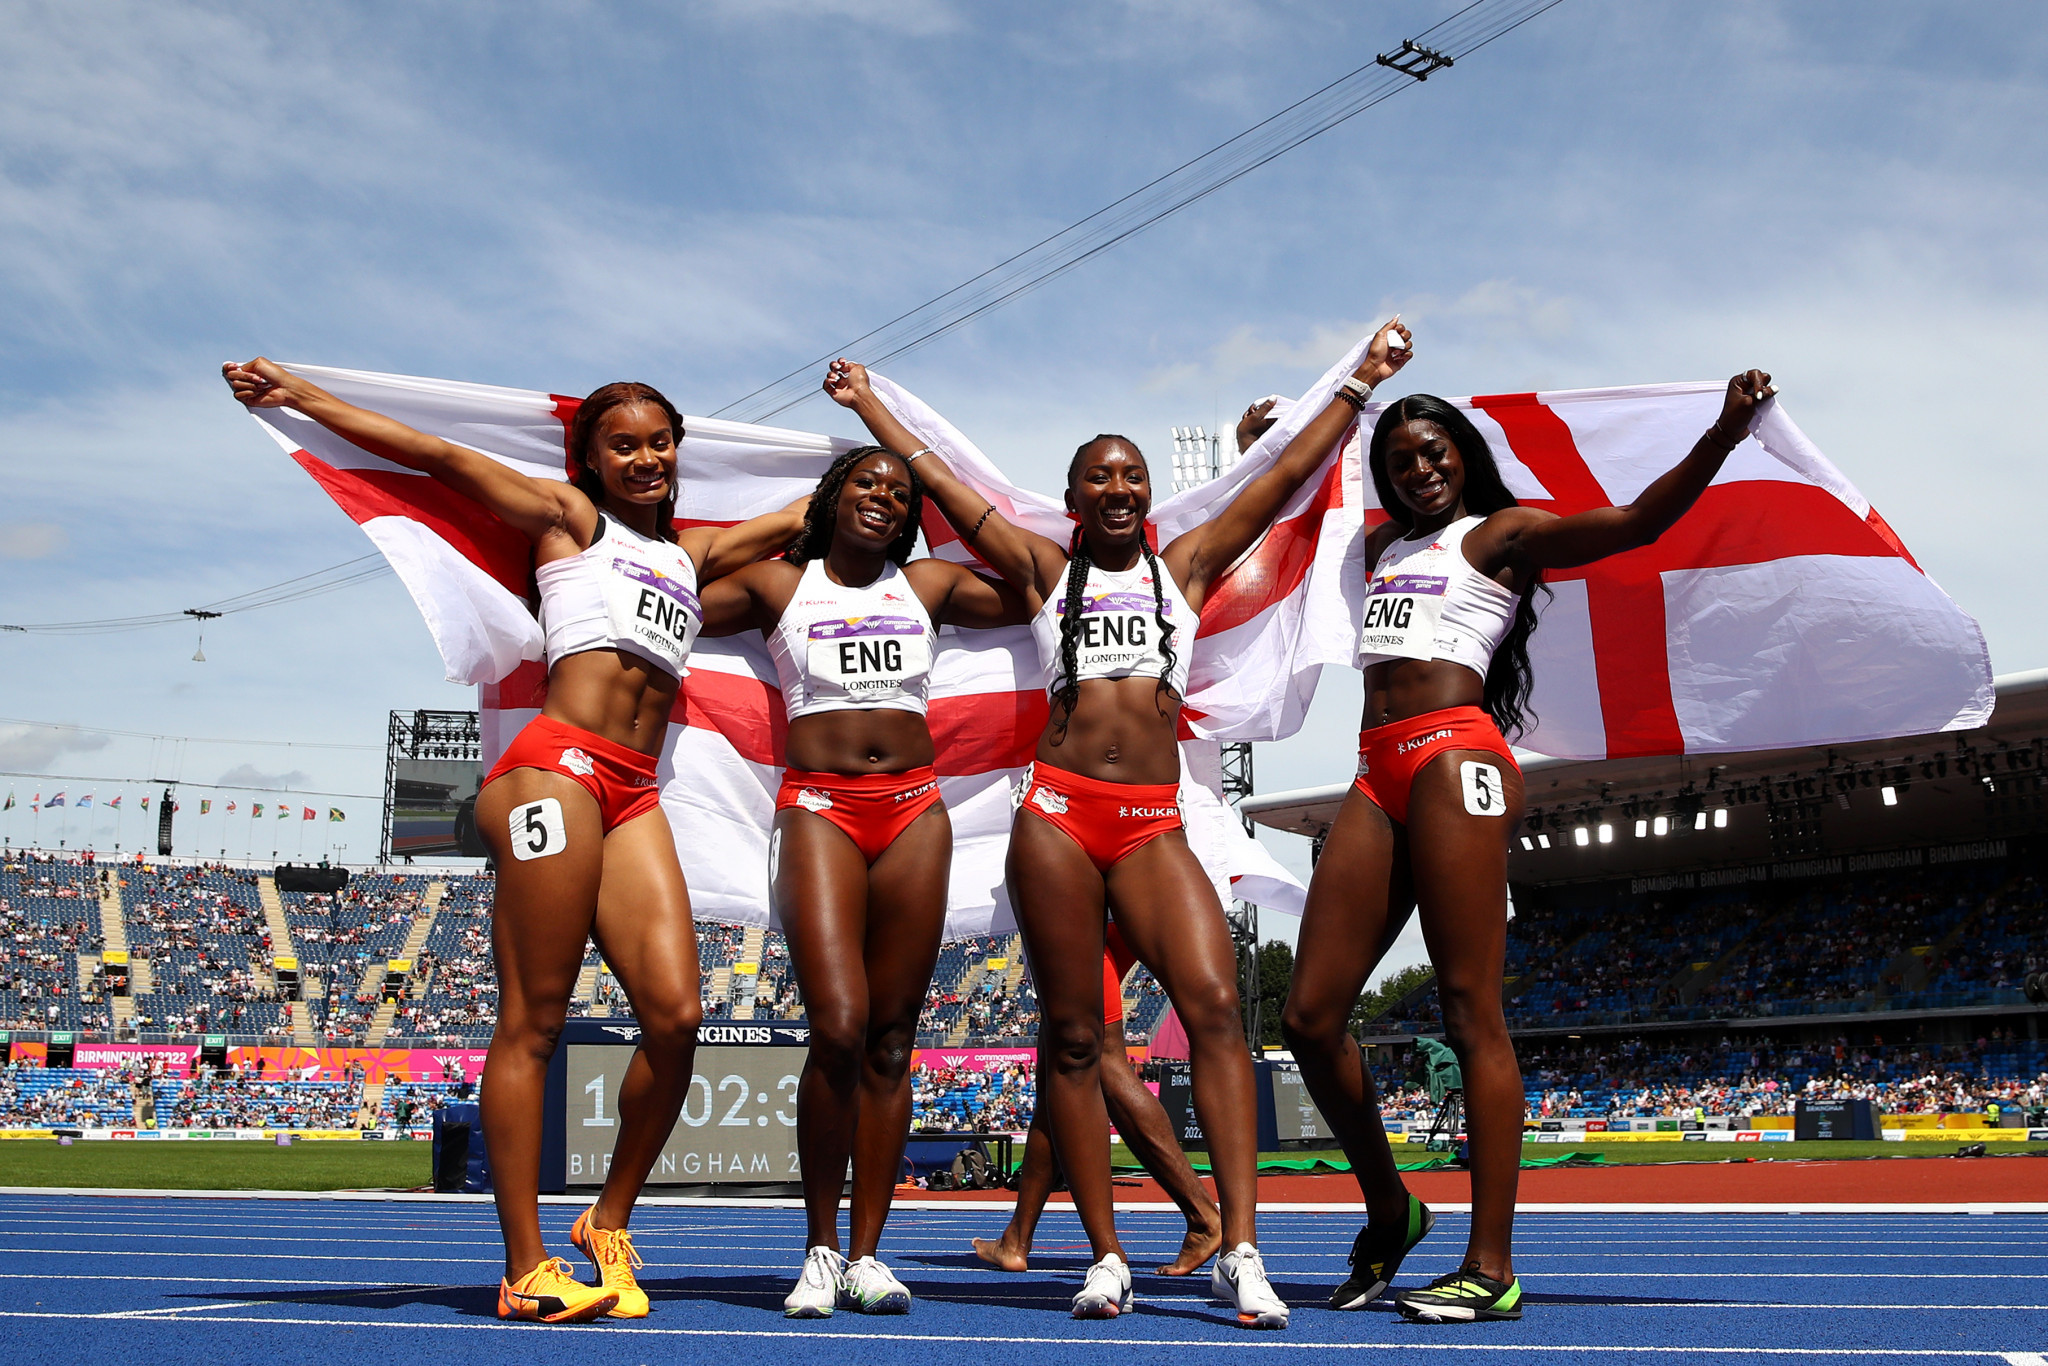 England win Birmingham 2022 women's 4x100m relay gold after Lucozade excuse by Nigerian sprinter rejected